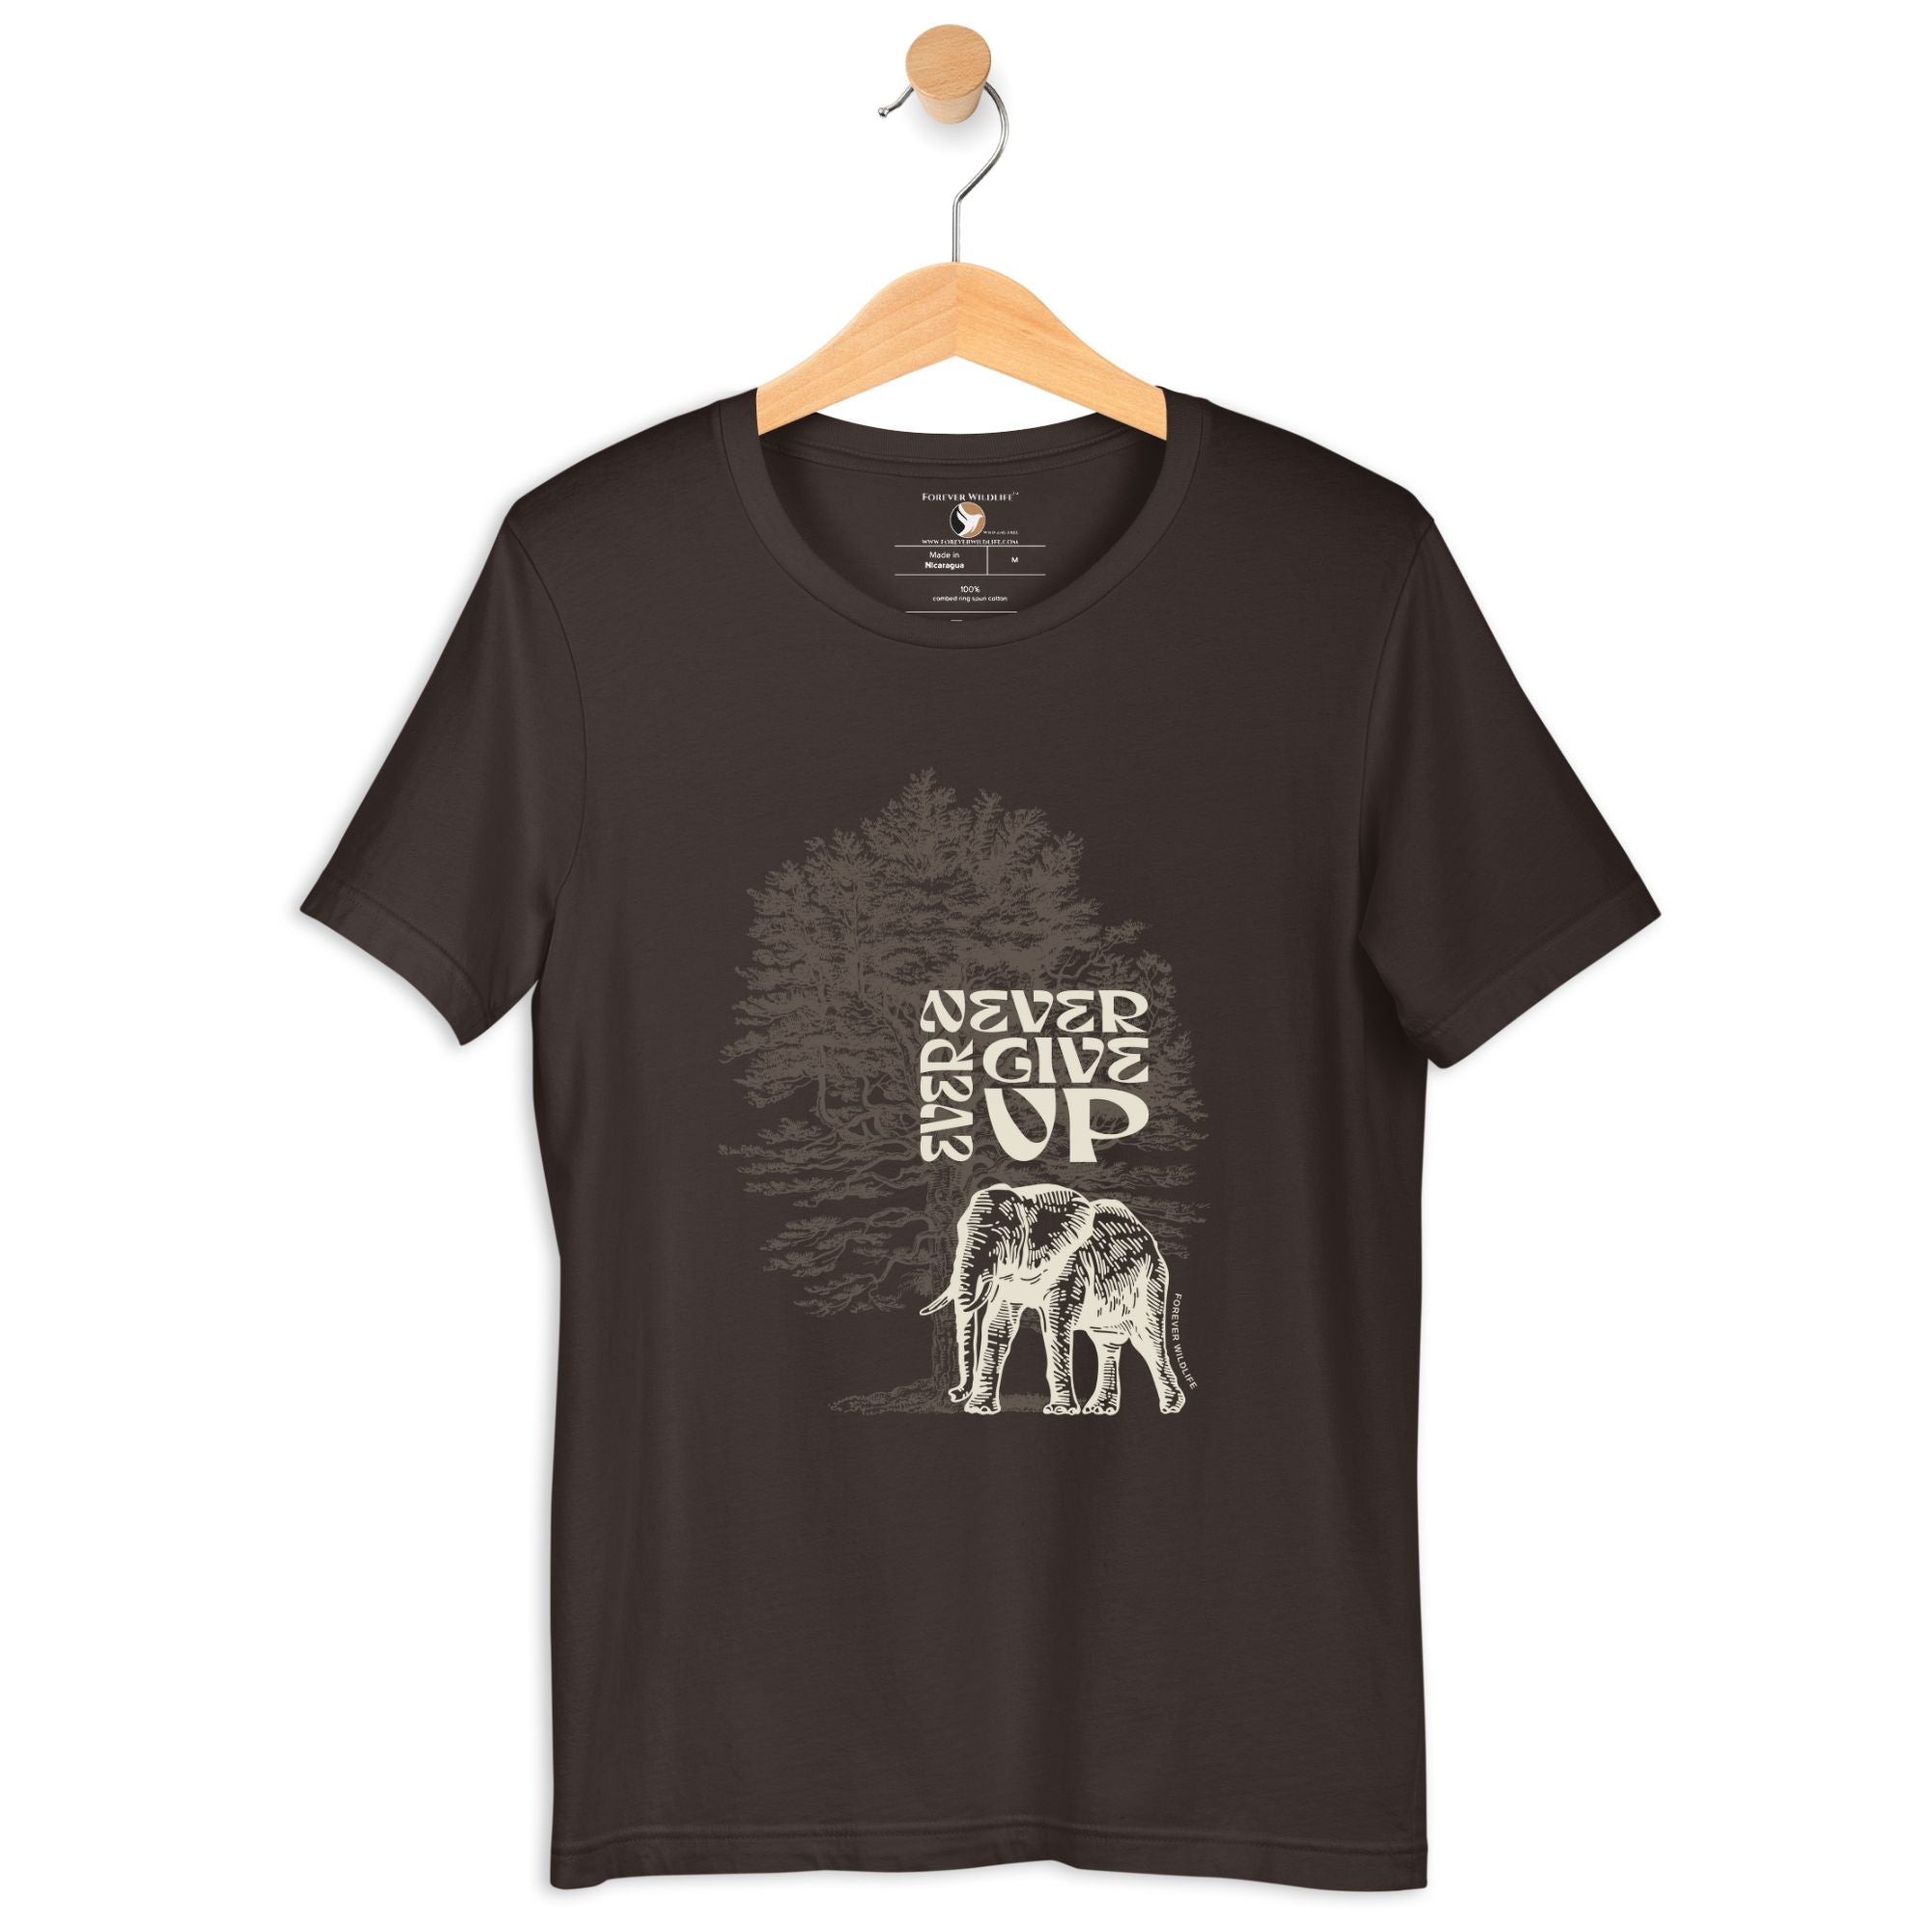 Elephant T-Shirt in Brown – Premium Wildlife T-Shirt Design with Never Ever Give Up text, Elephant Shirts & Wildlife Clothing